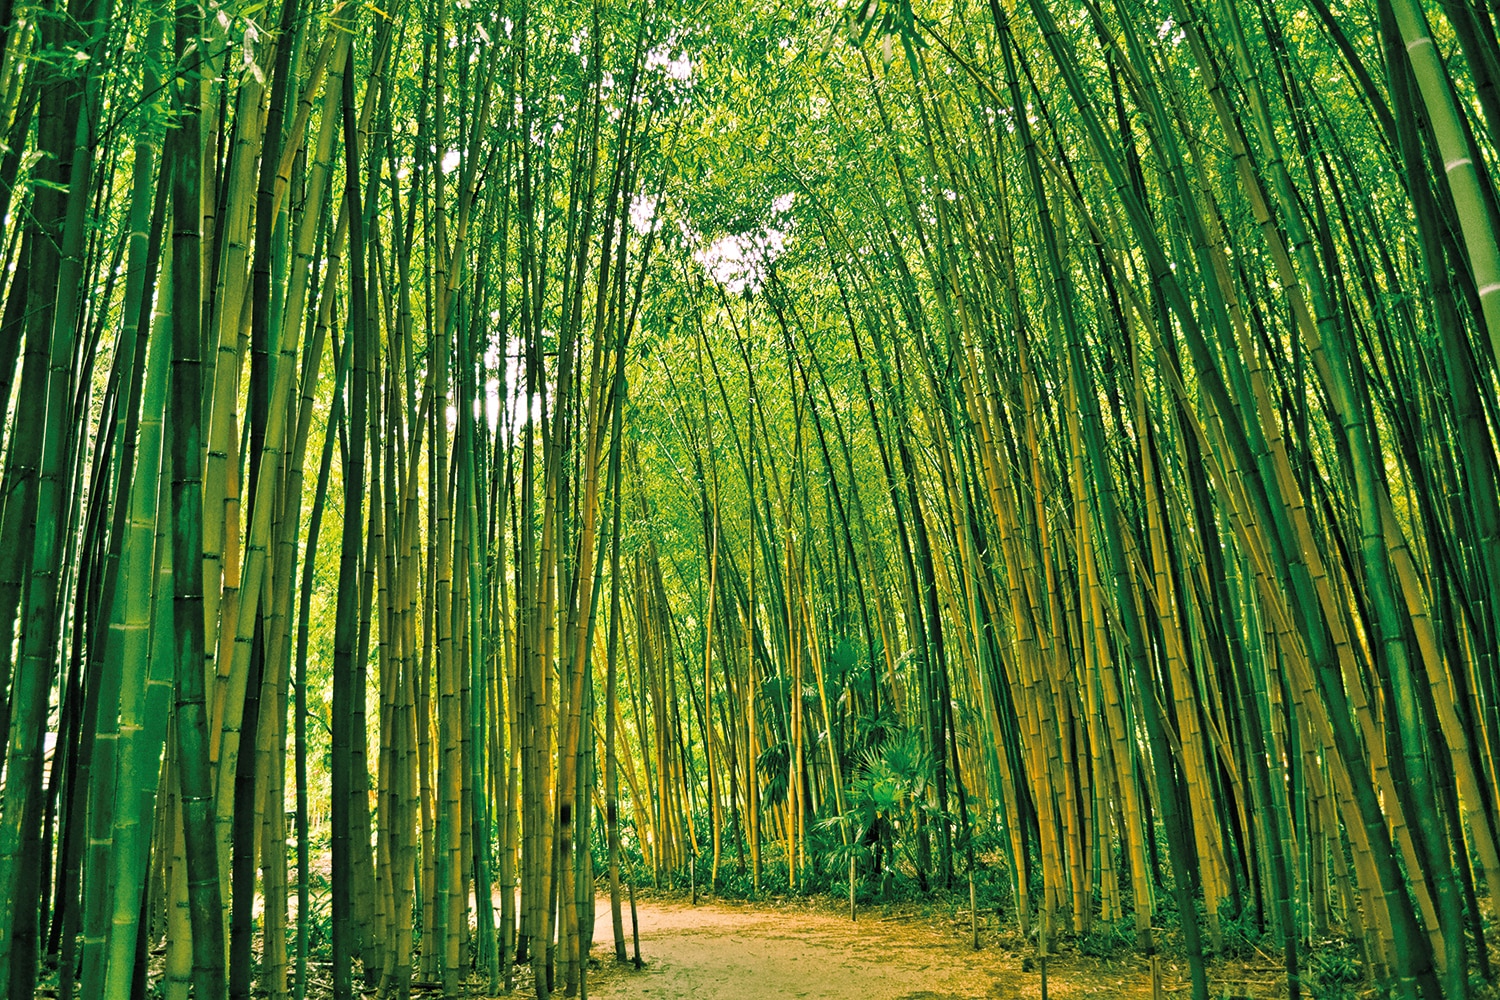 Papermoon Fototapete "Bamboo Forest" von Papermoon